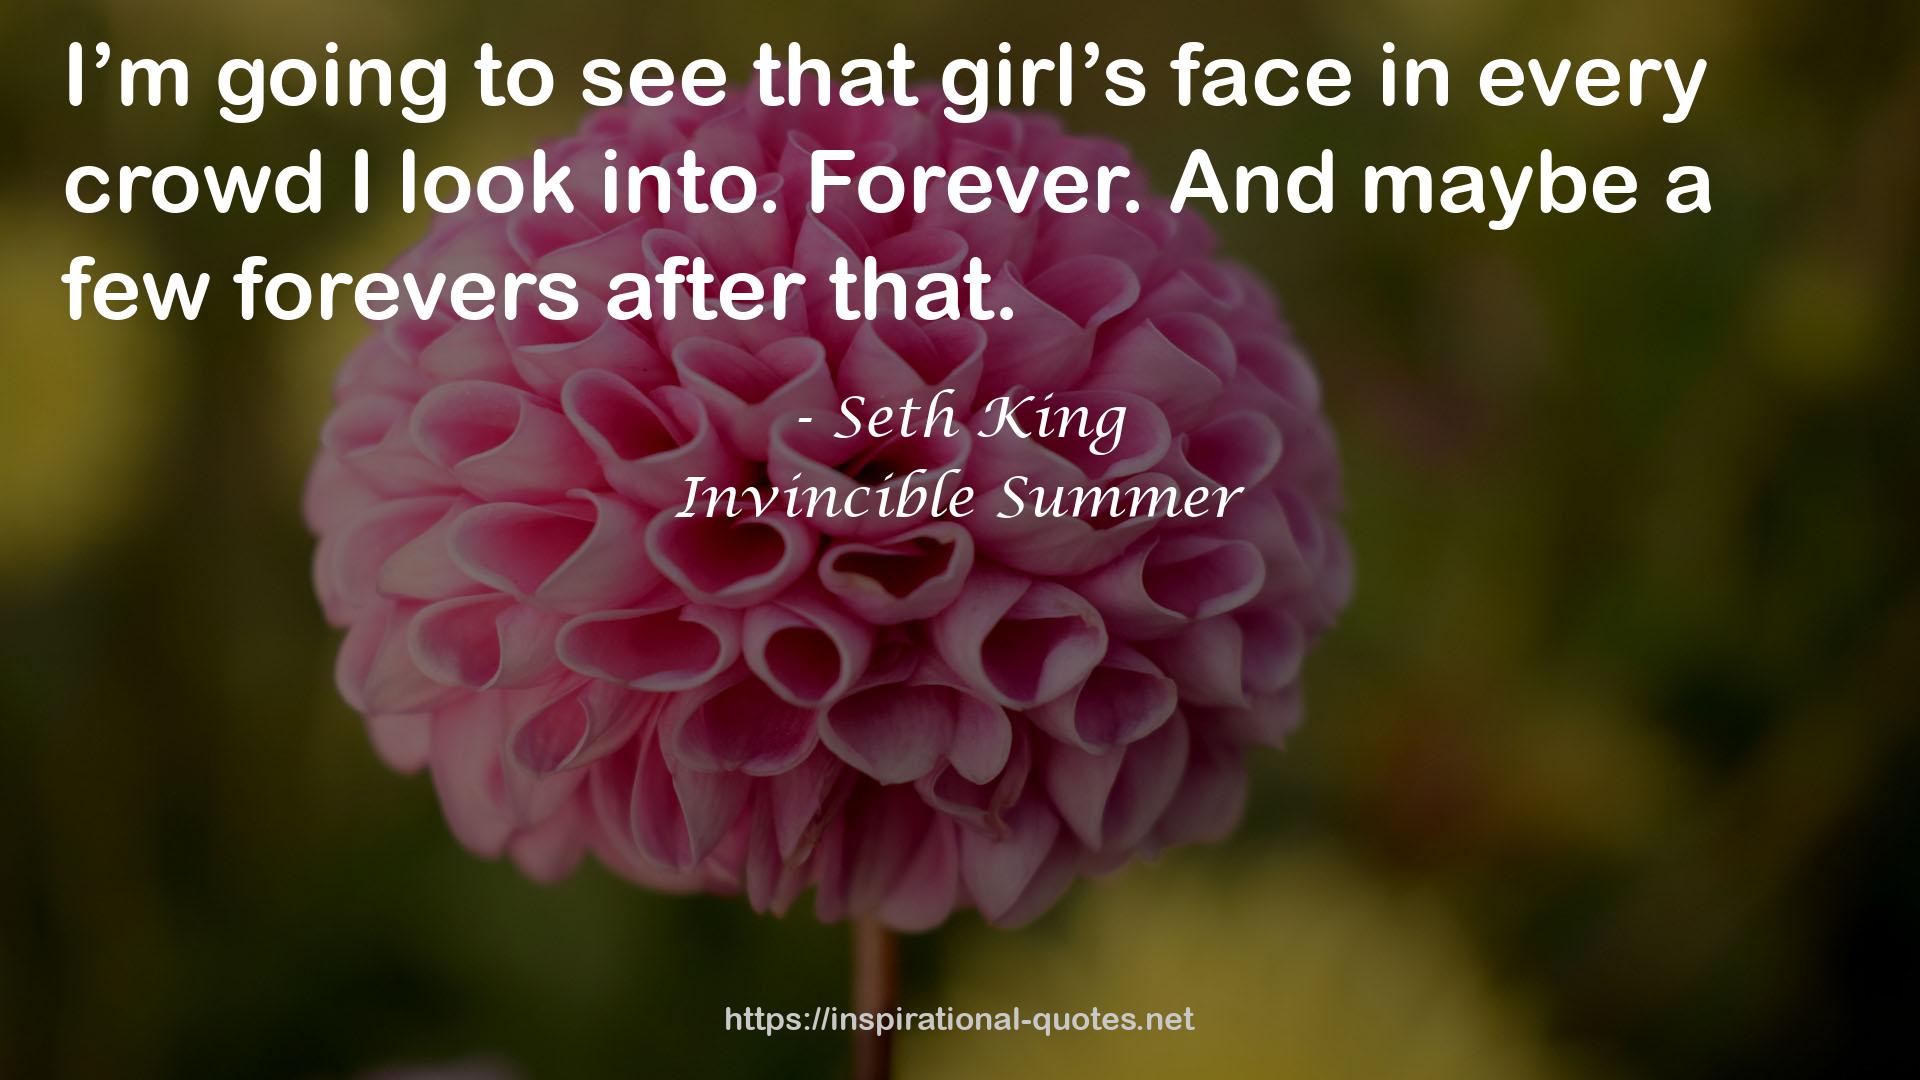 Invincible Summer QUOTES